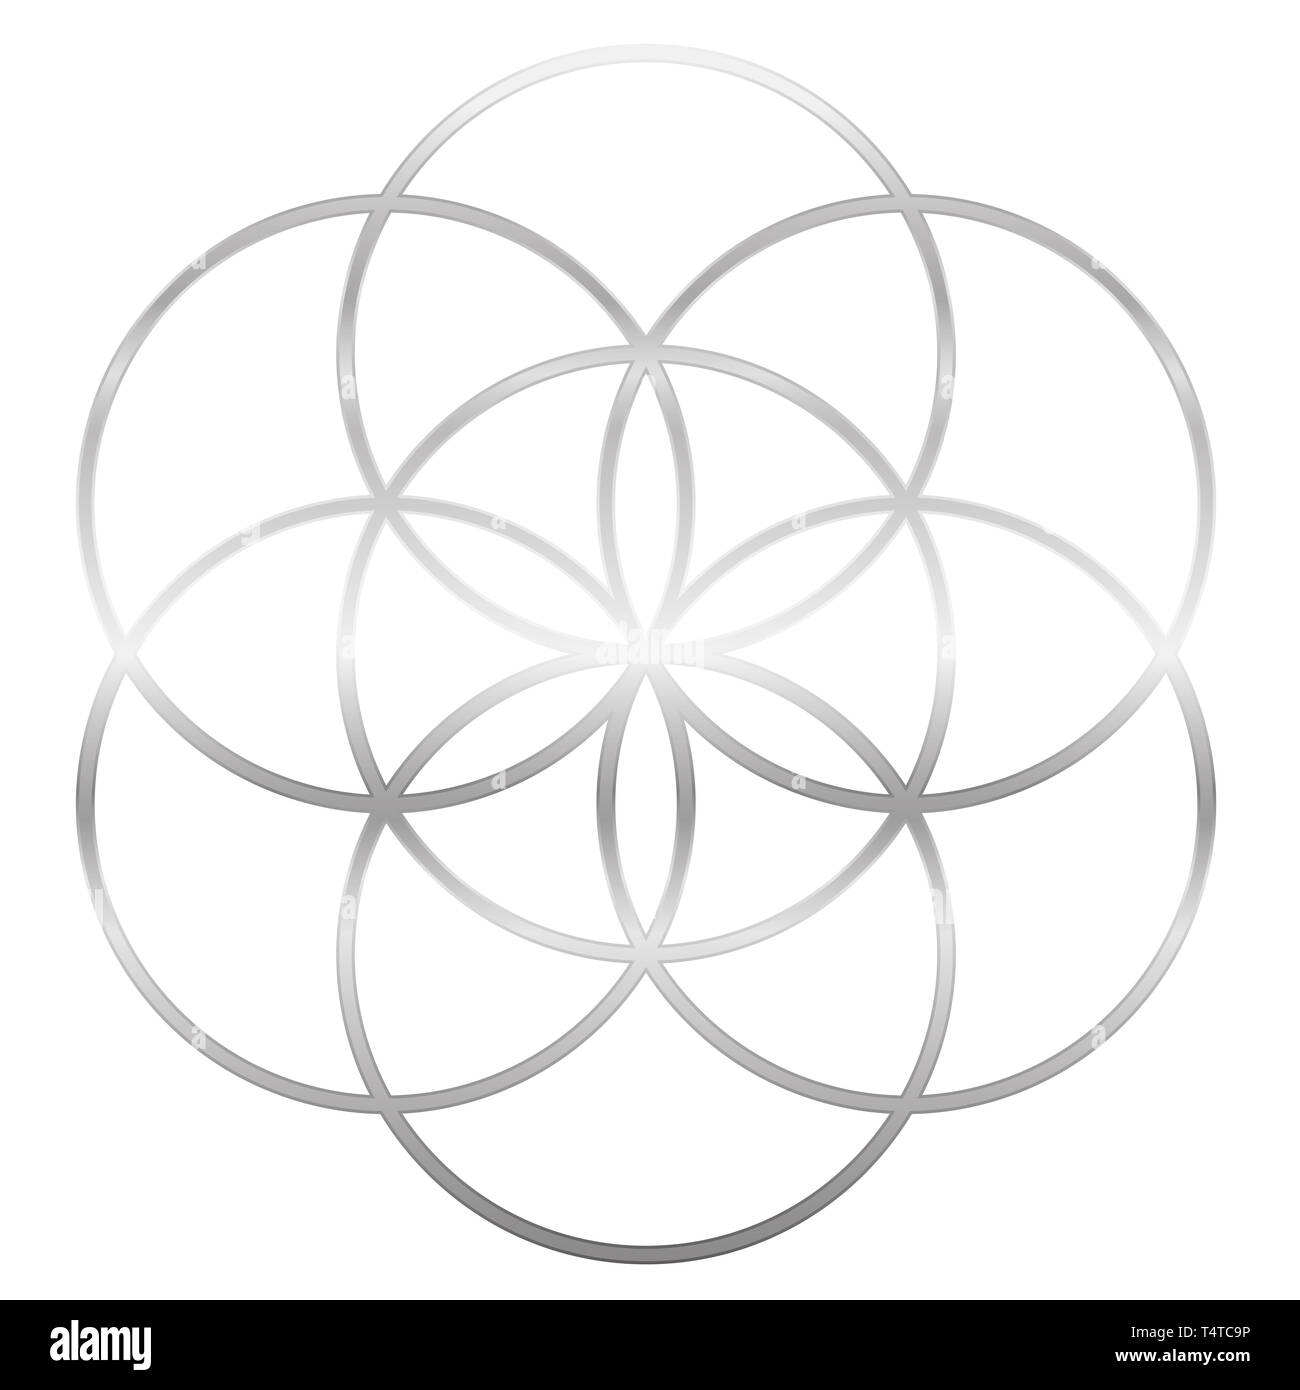 Silver Seed of Life. Precursor of Flower of Life symbol. Unique geometrical figure, composed of seven overlapping circles of same size. Stock Photo